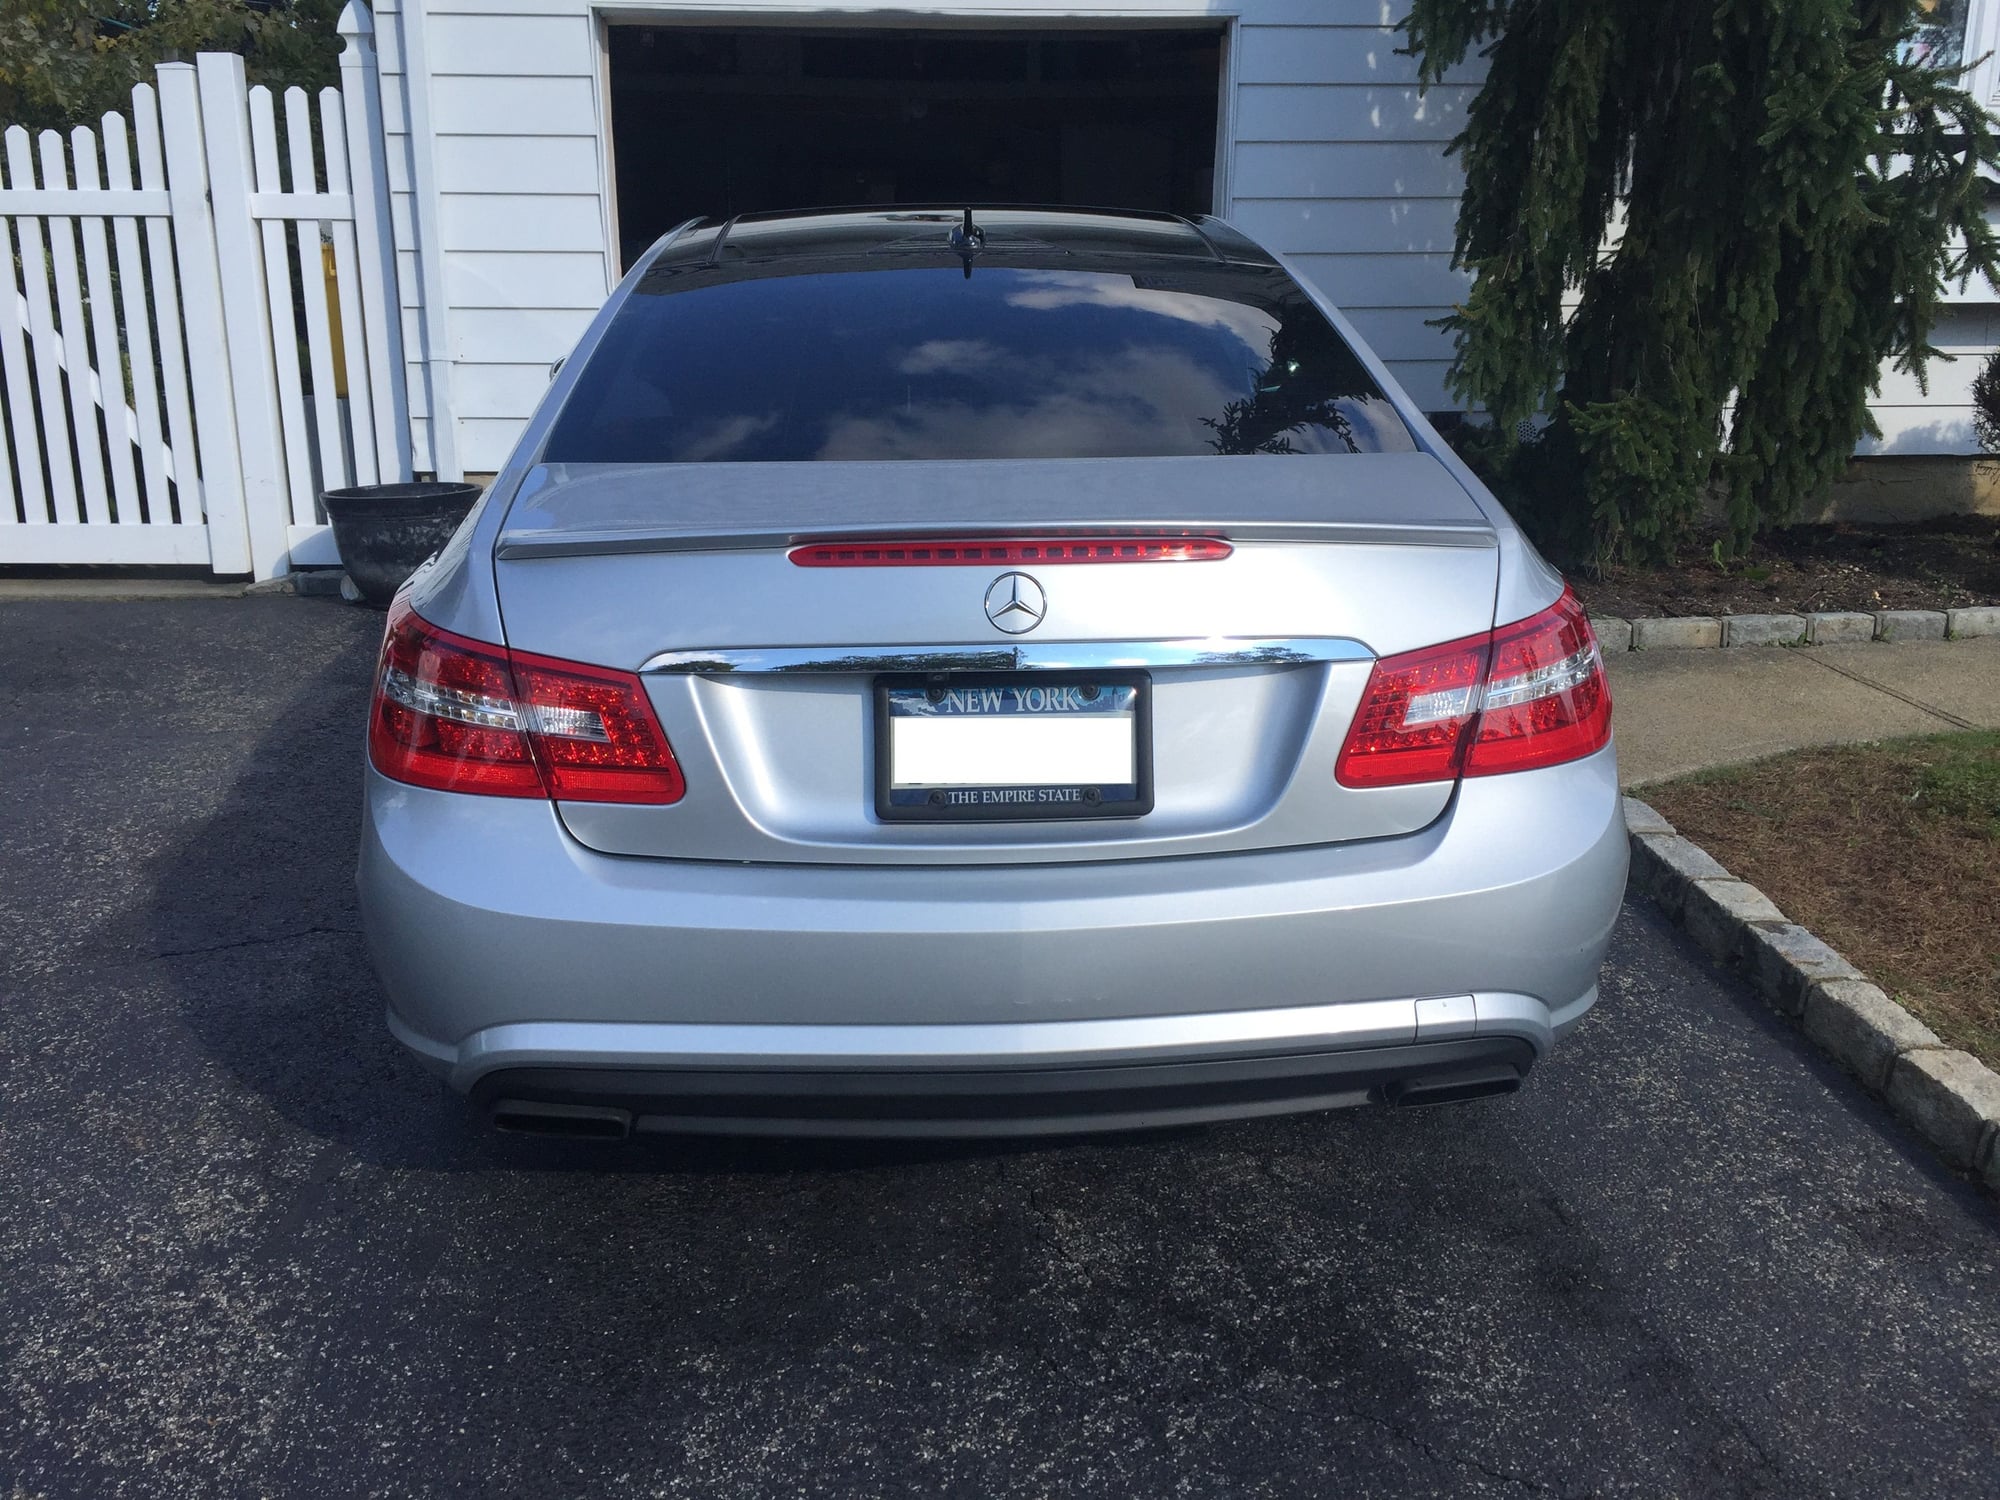 2010 Mercedes-Benz E550 - 2010 E550 Coupe in excellent condition - Used - VIN WBAHE6323RGF28057 - 87,000 Miles - 8 cyl - 2WD - Automatic - Coupe - Silver - Massapequa Park, NY 11762, United States